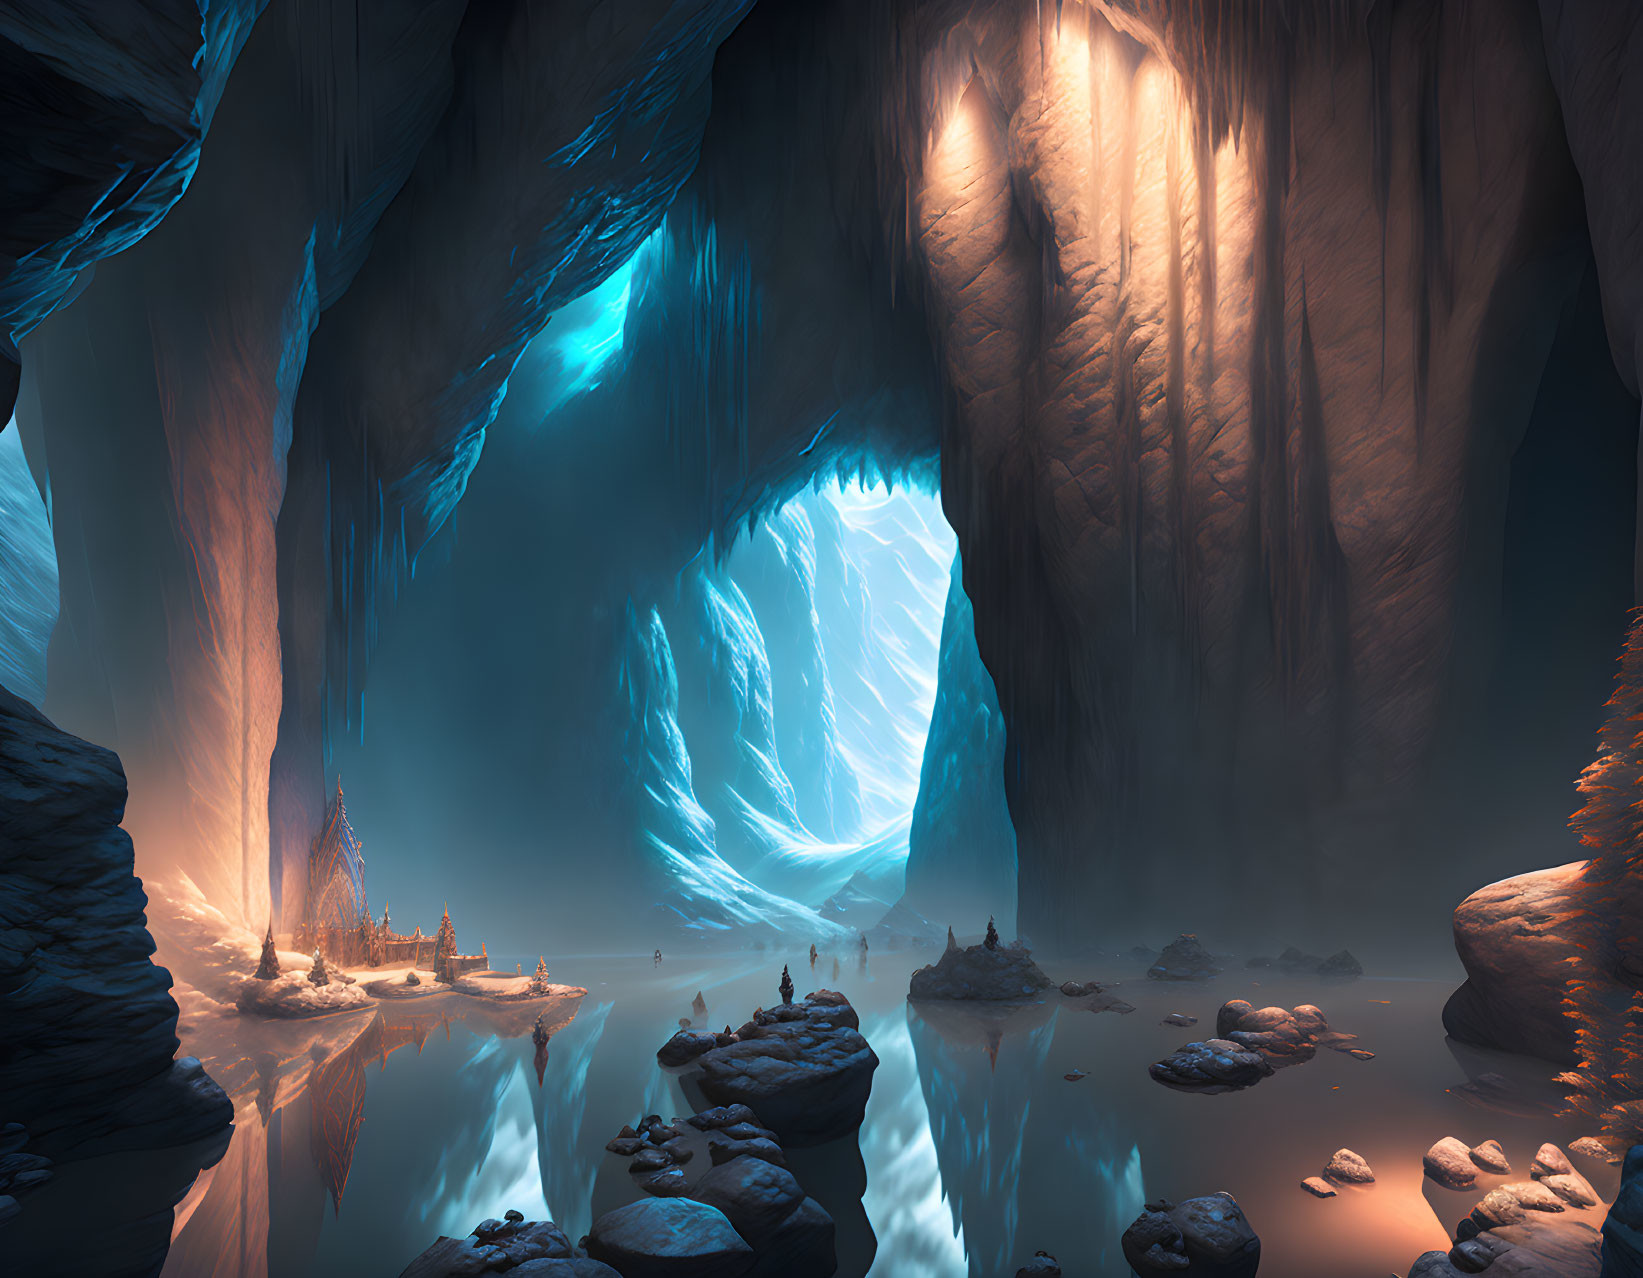 Ethereal underground cave with blue light, water bodies, rock formations